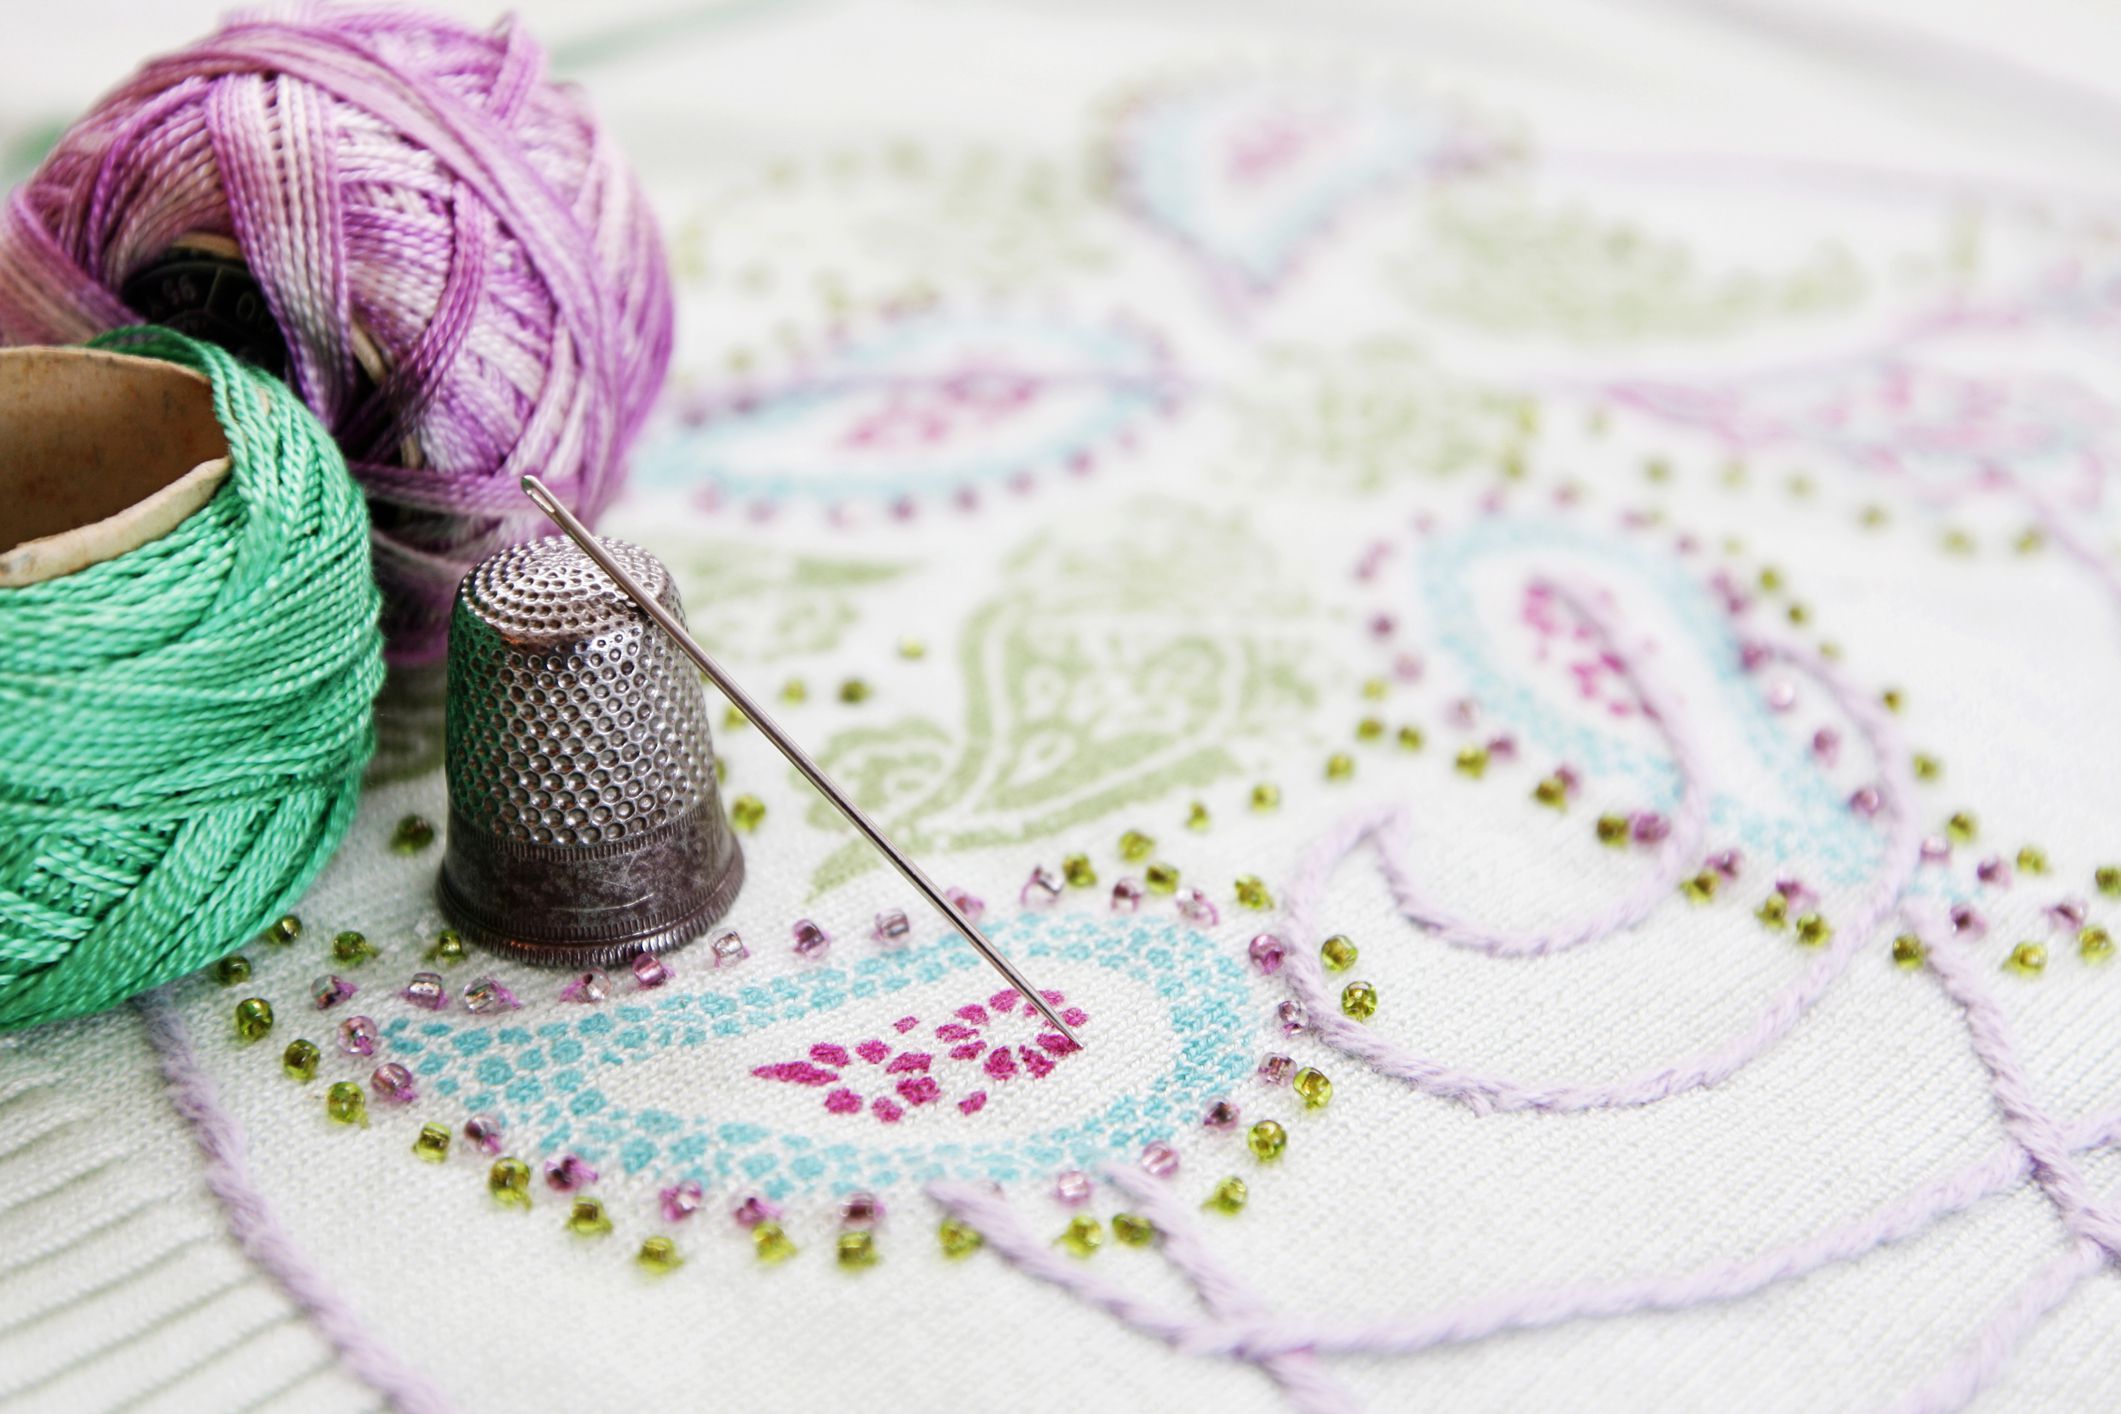 The orientation of embroidery stitches